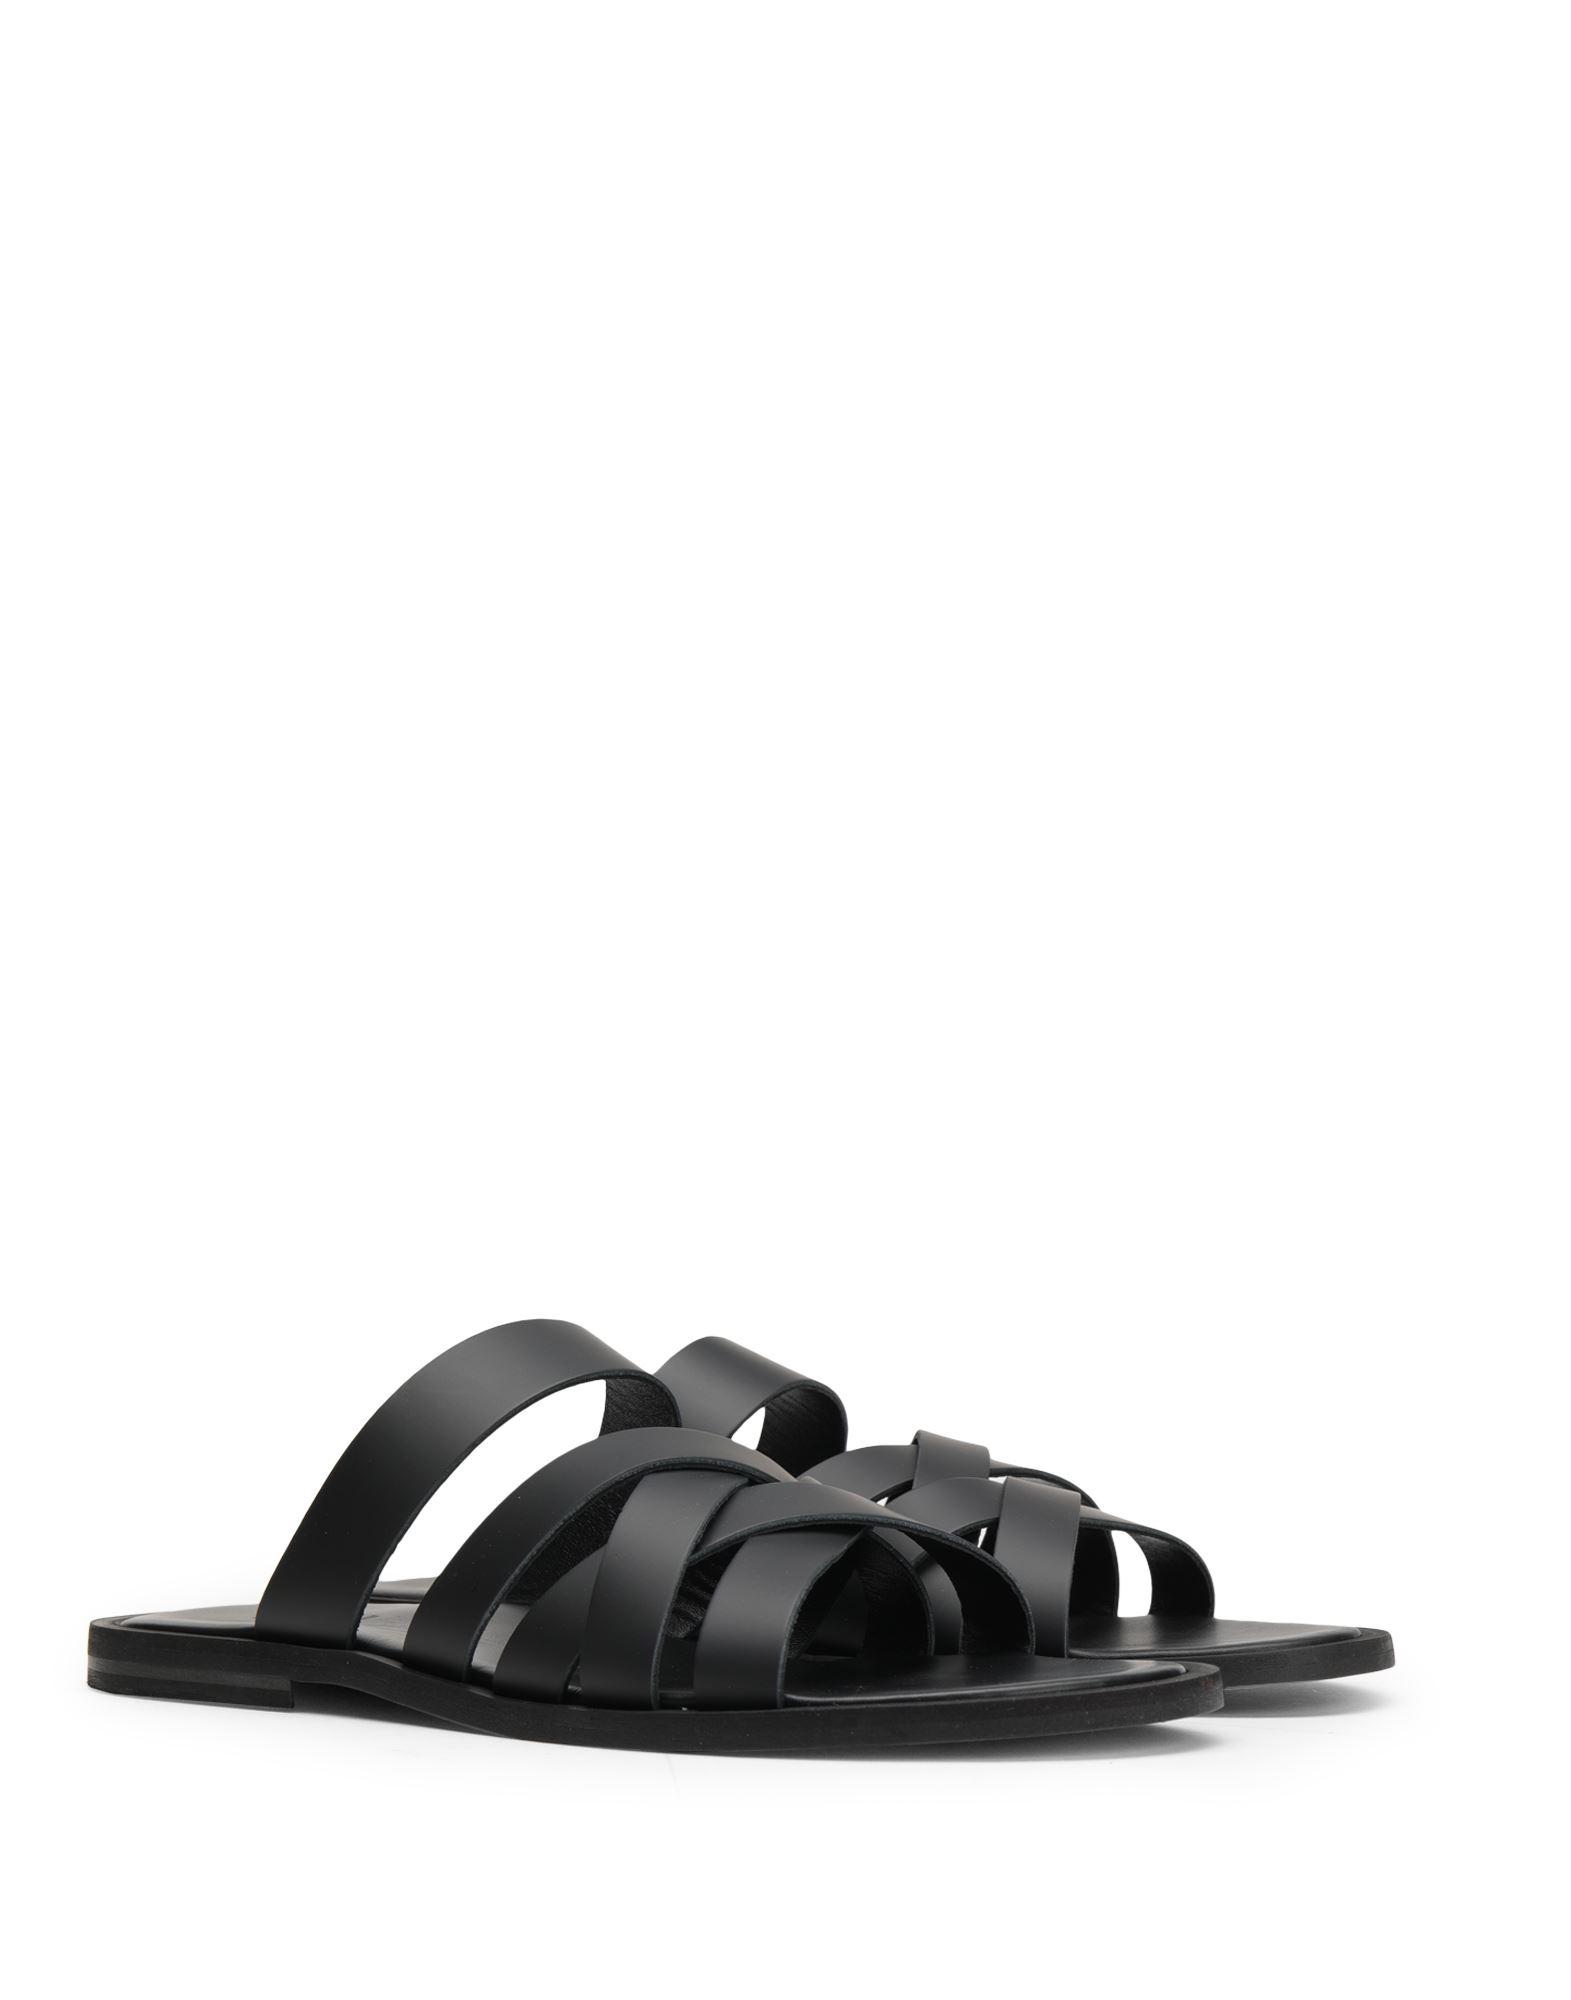 8 by YOOX Leather Sandals in Black for Men - Lyst